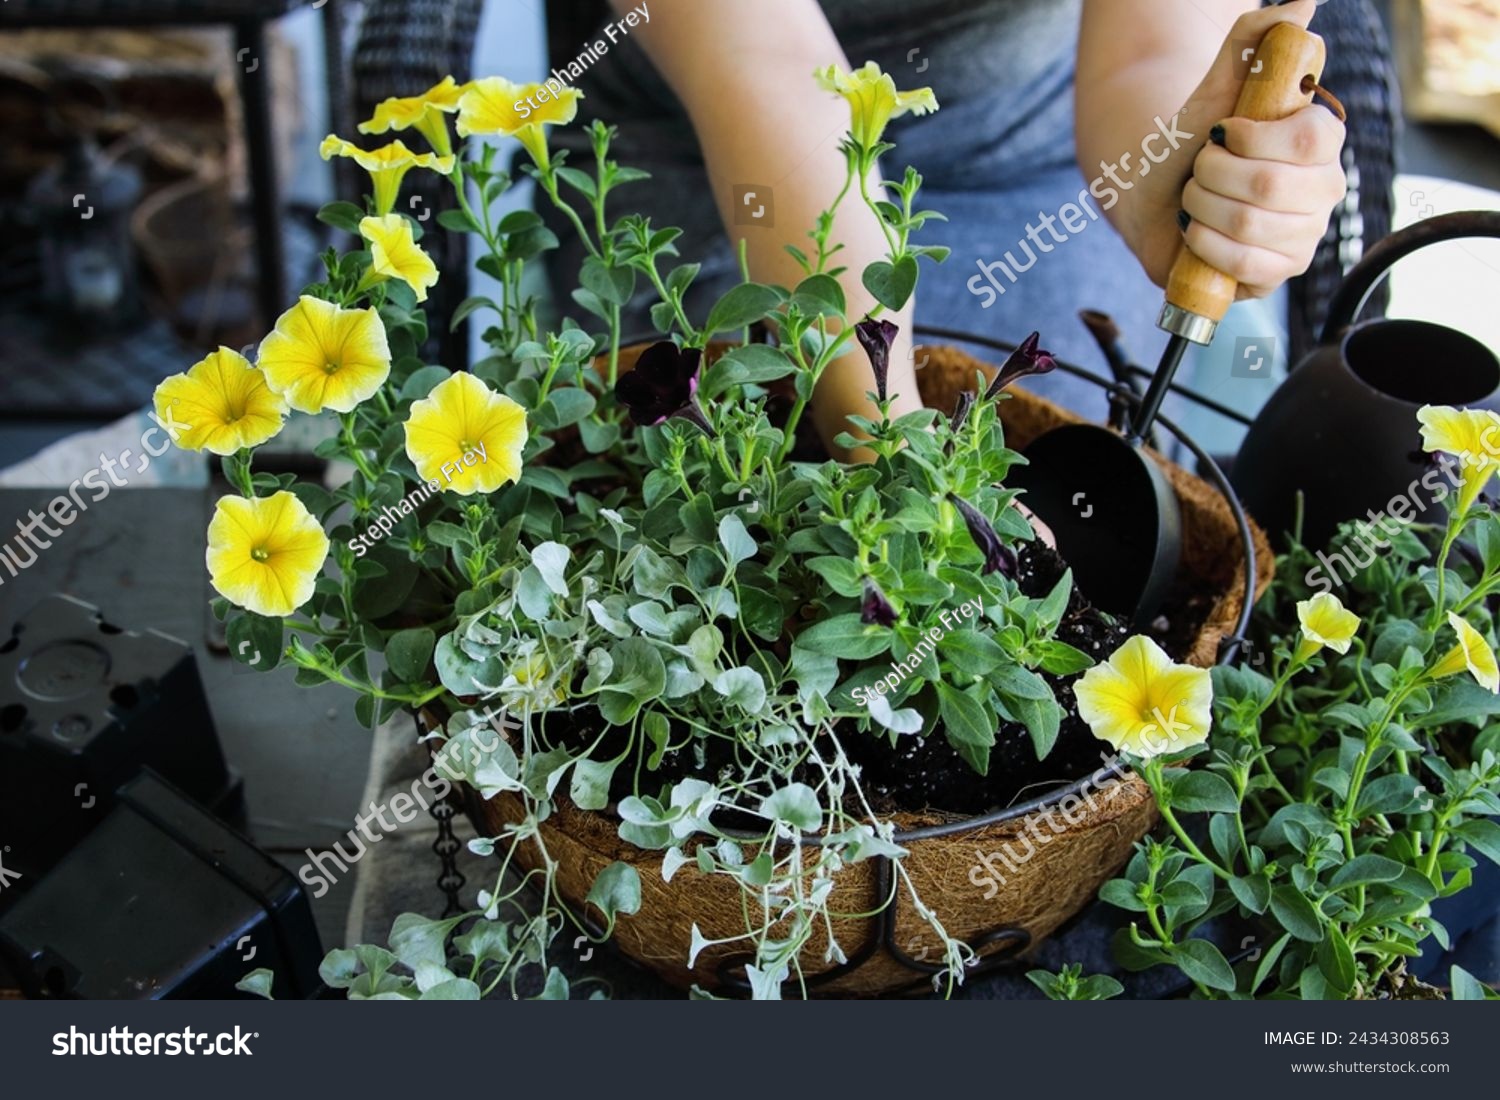 Young woman using a trowel plant a mixed annual hanging basket or pot of flowers. Flowers include yellow and black petunias with dichondra. #2434308563